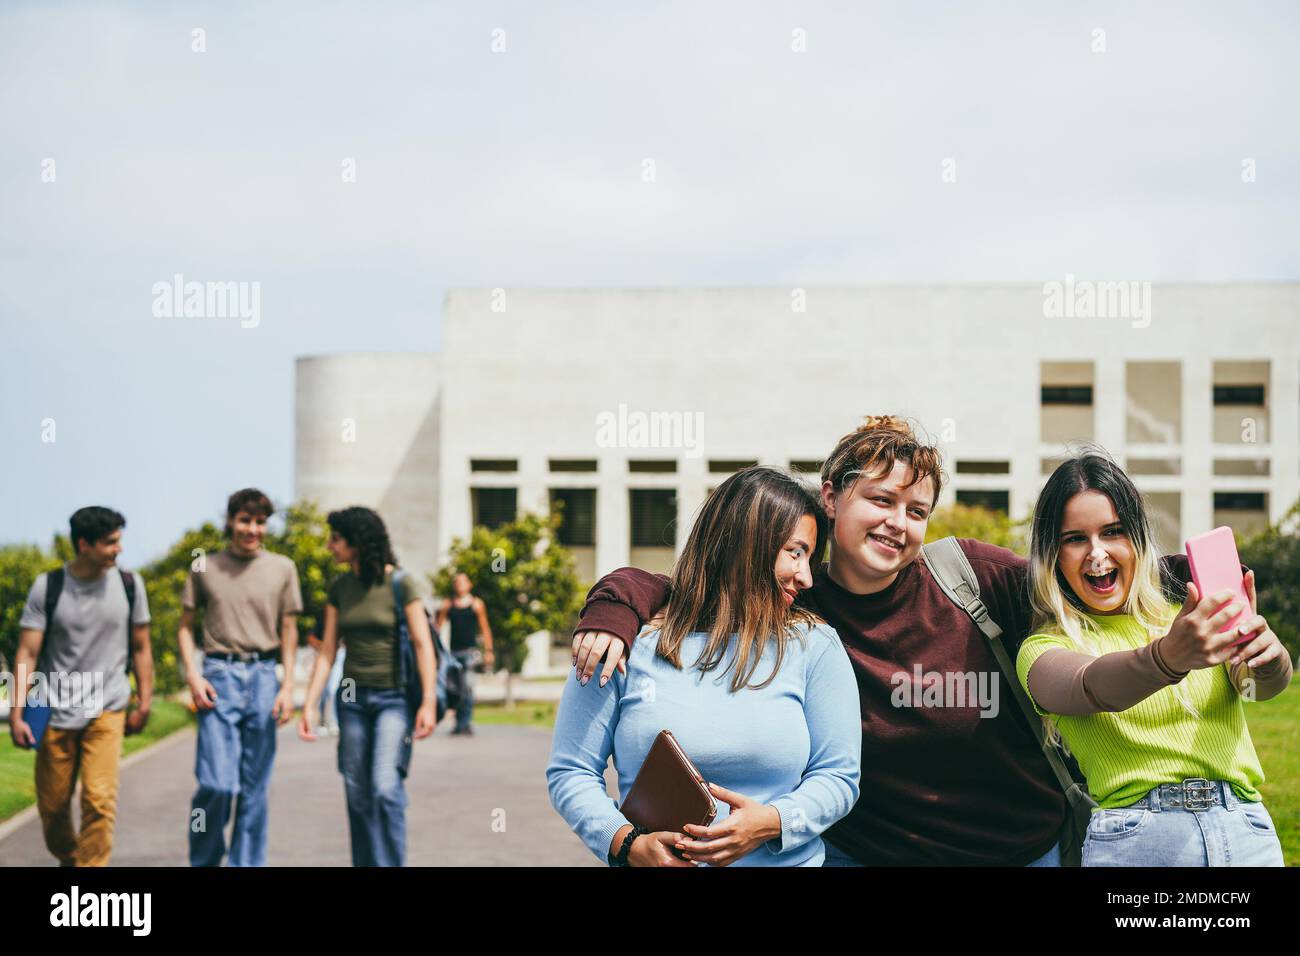 Young group of friends having fun doing selfie outside with school building on background - Focus on girls faces Stock Photo